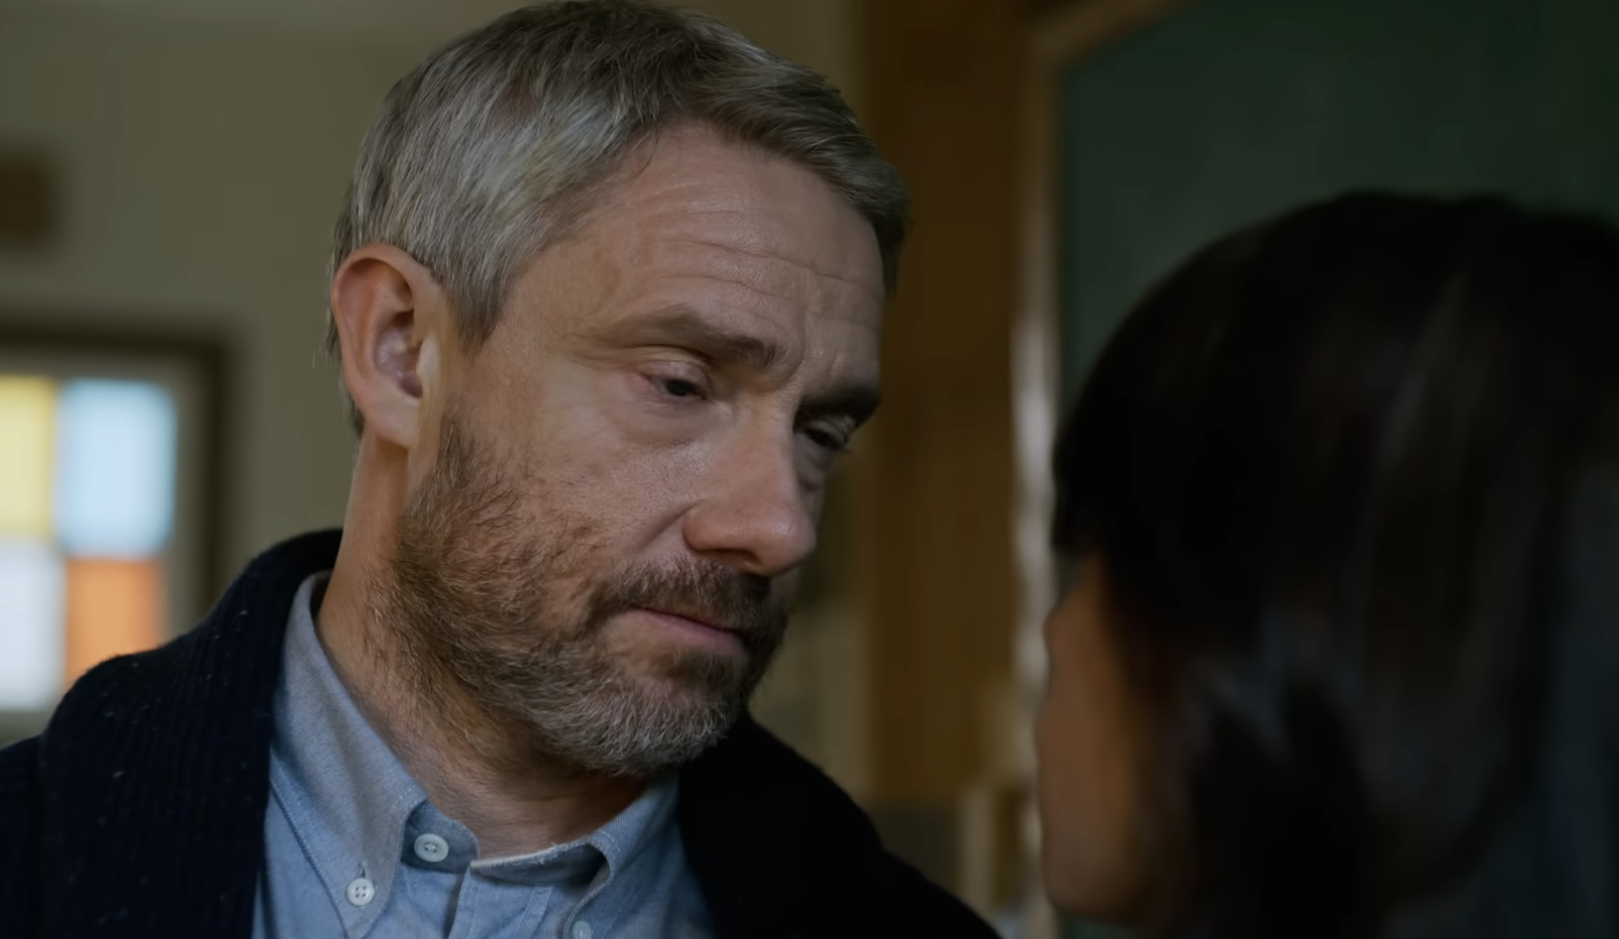 Martin in a sweater looking at Jenna up close in a scene from the film